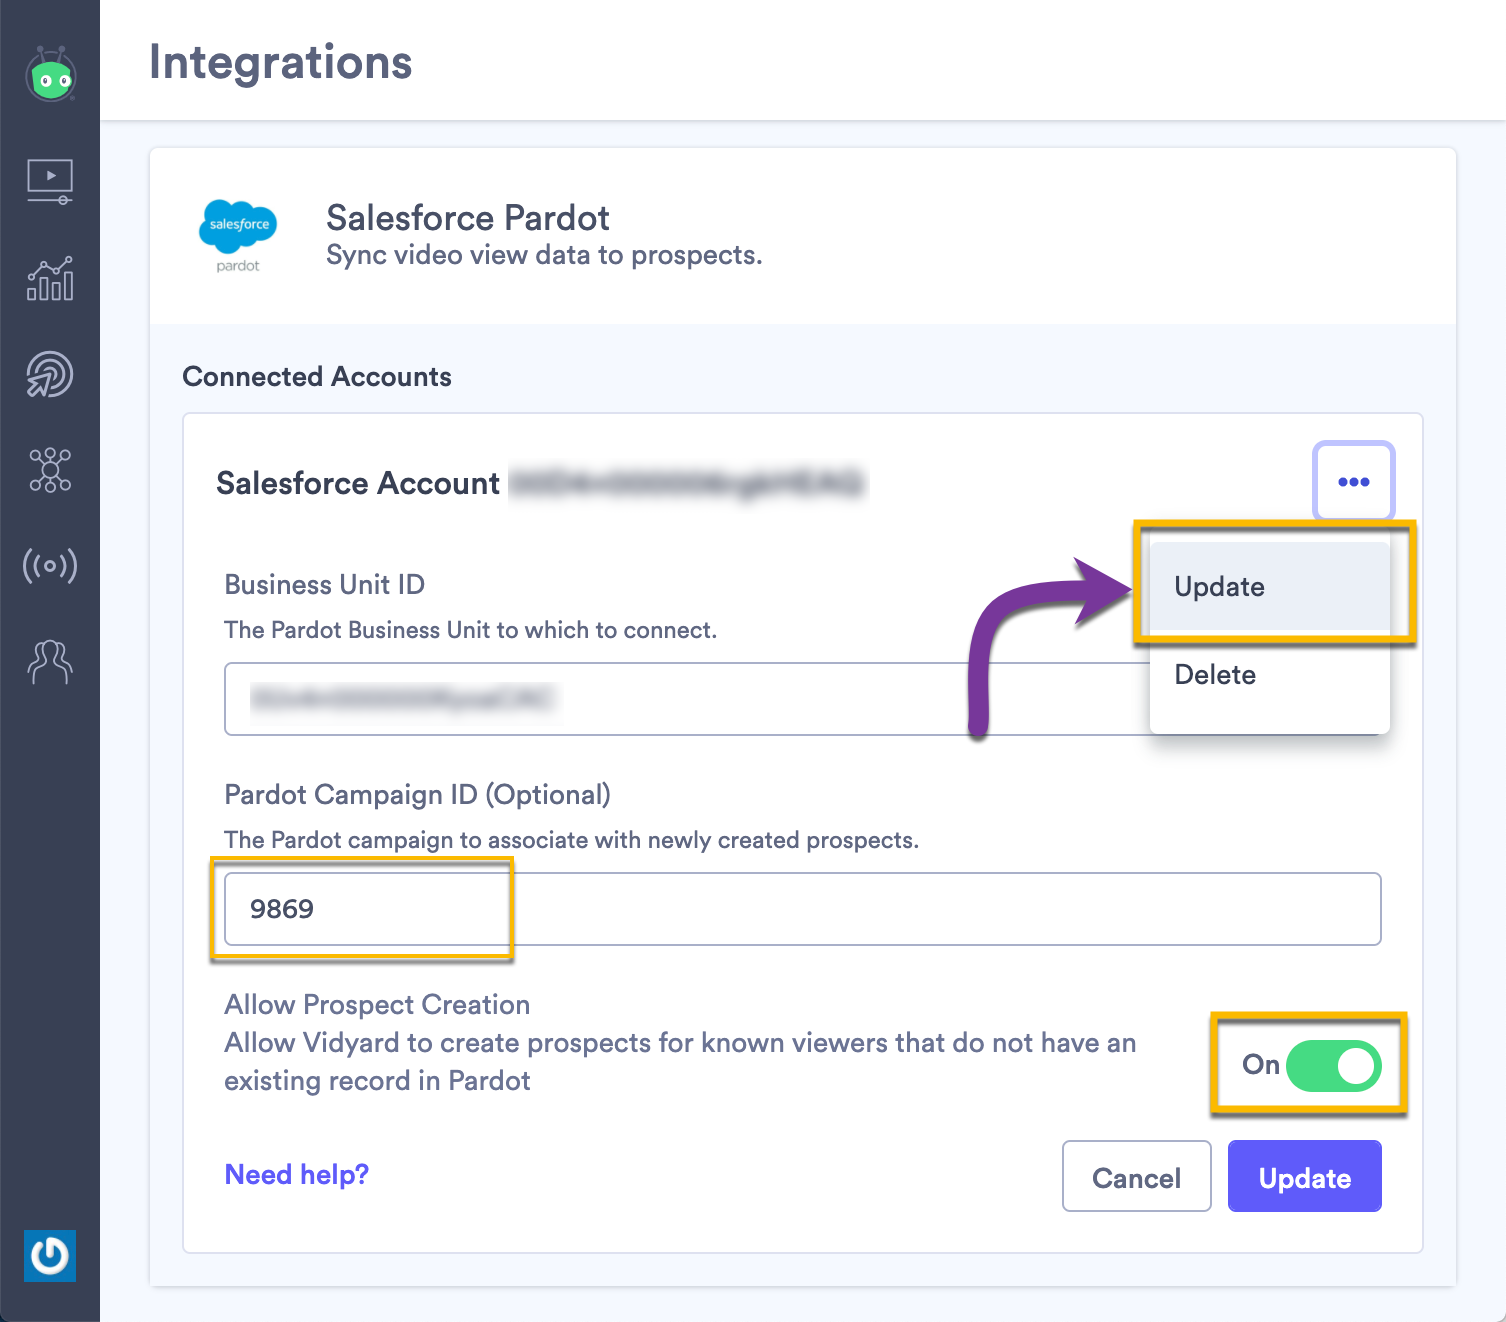 Opening the configuration menu for the Pardot integration in Vidyard to enable the prospect creation setting